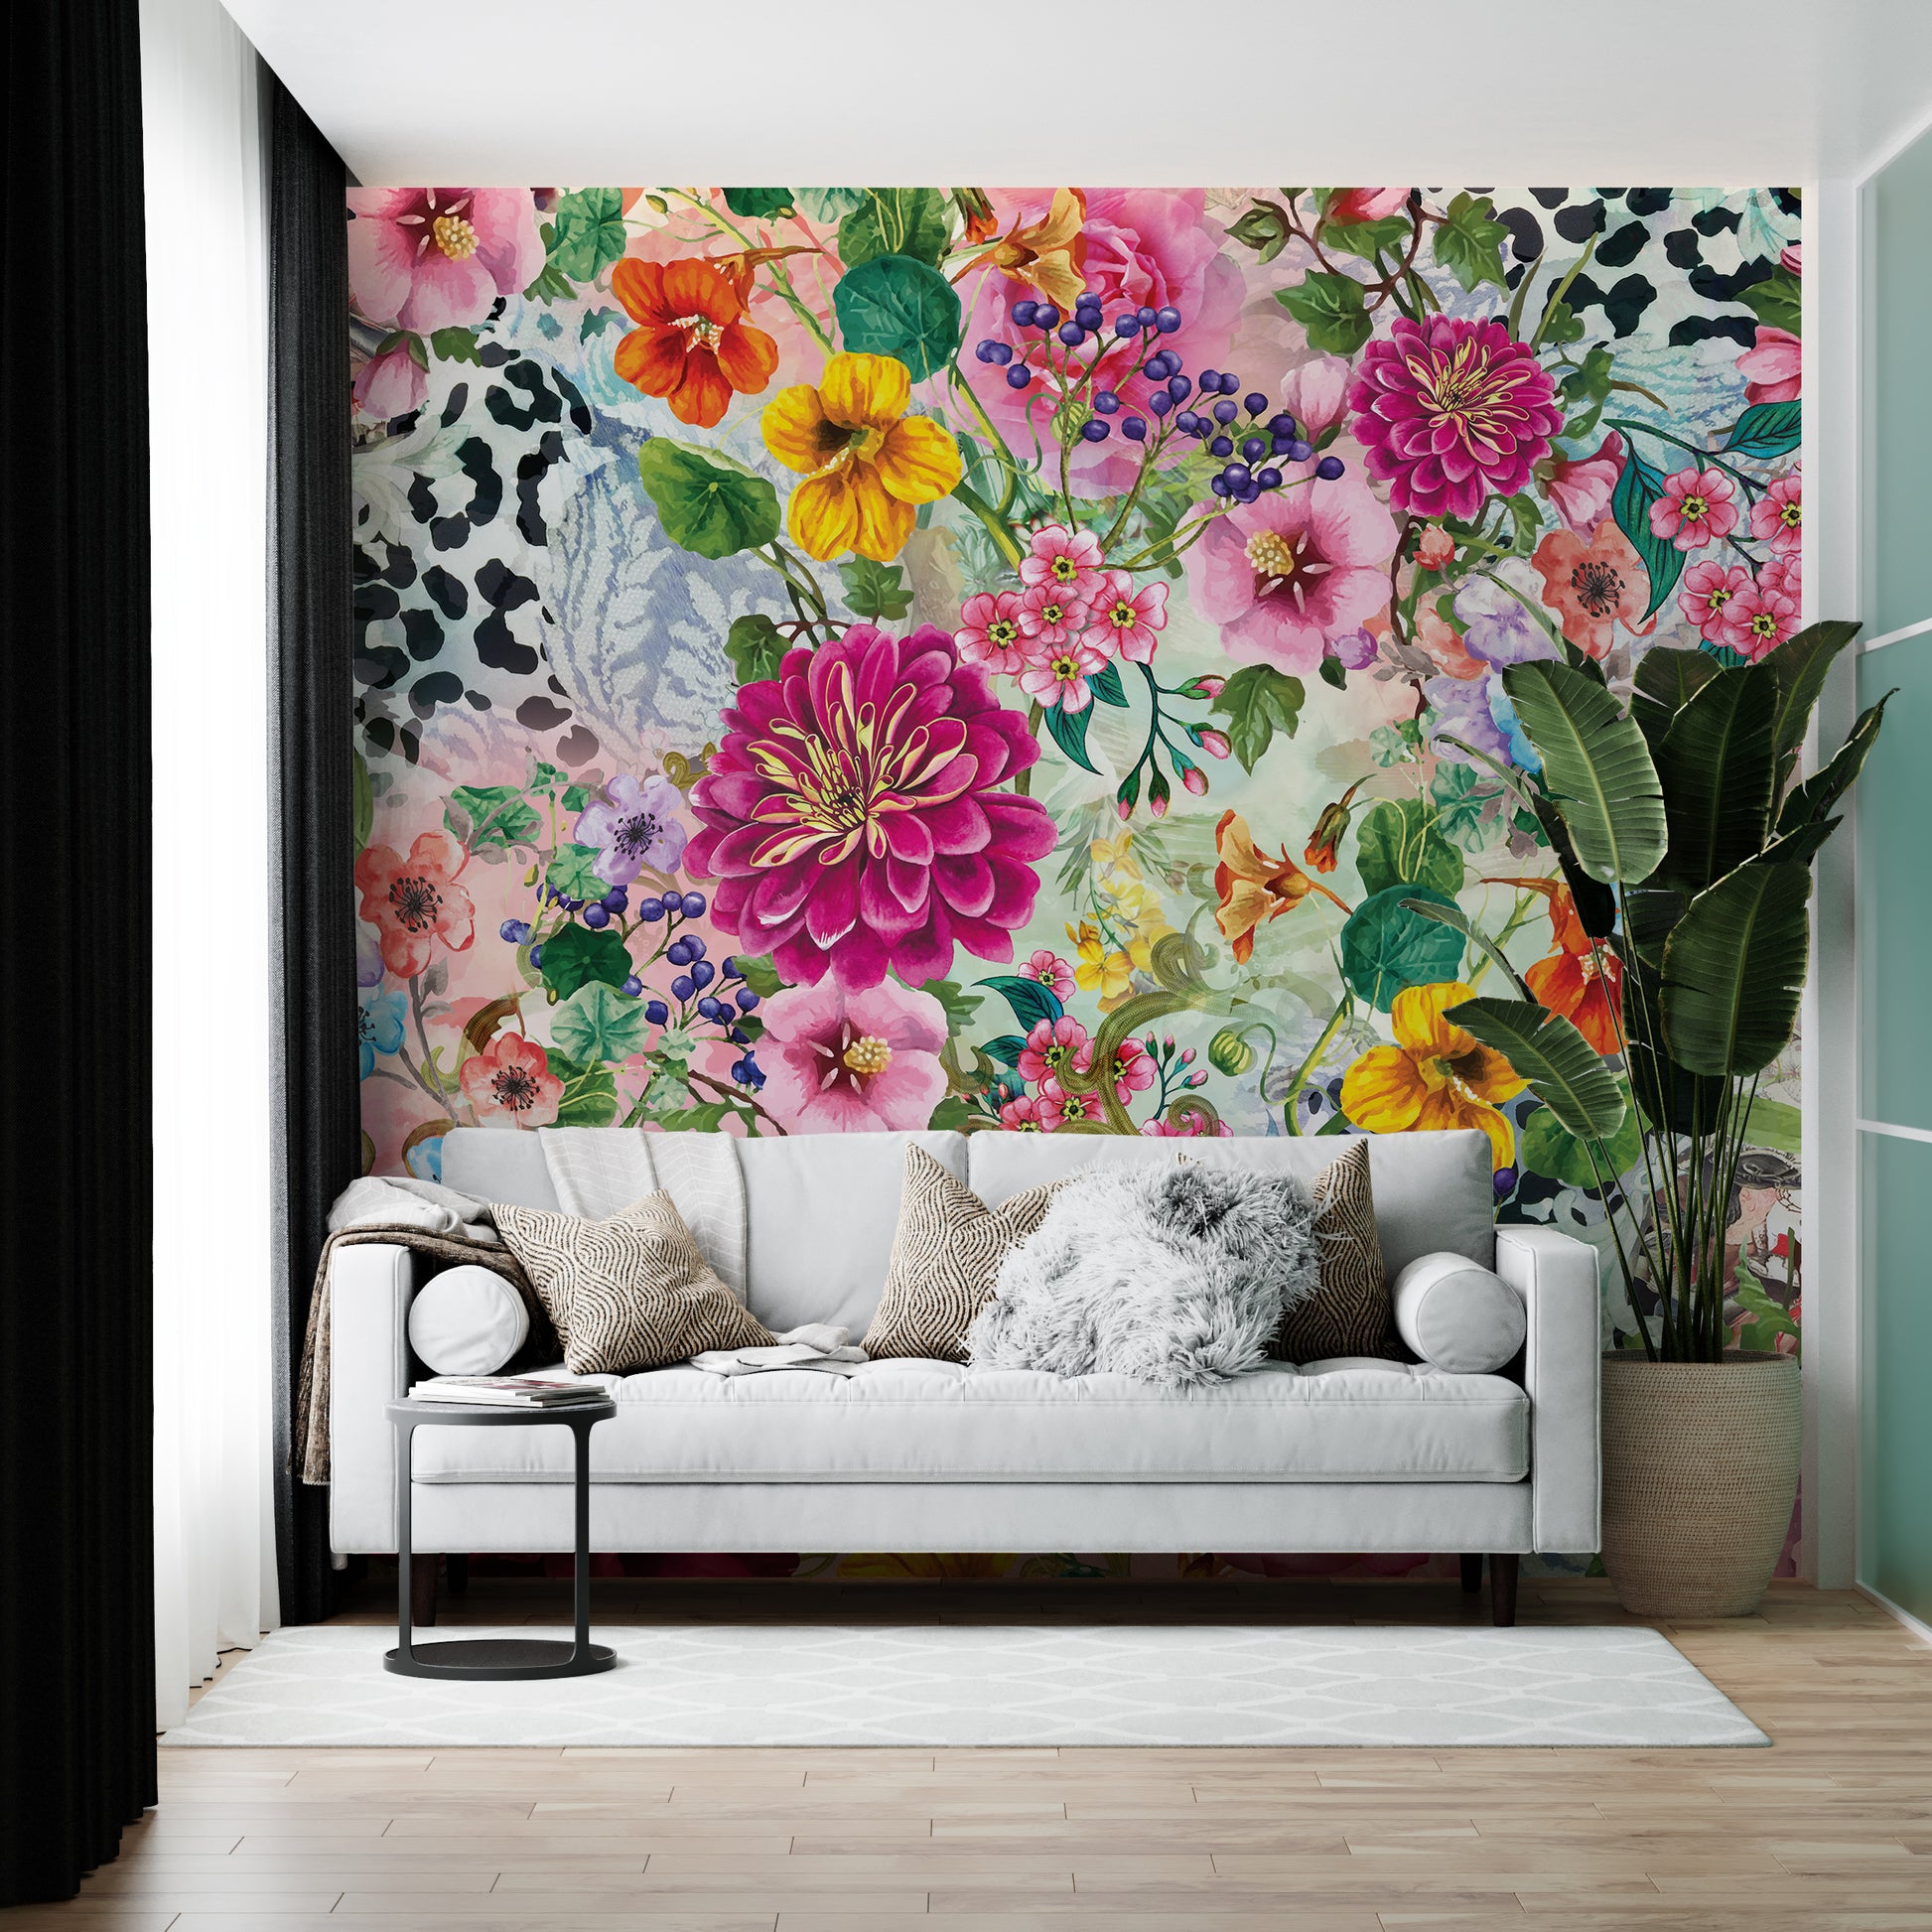 Melli Mello Floral attraction photowall wallpaper floral bombastic animal print bold deco eyecatcher be different living room deco 